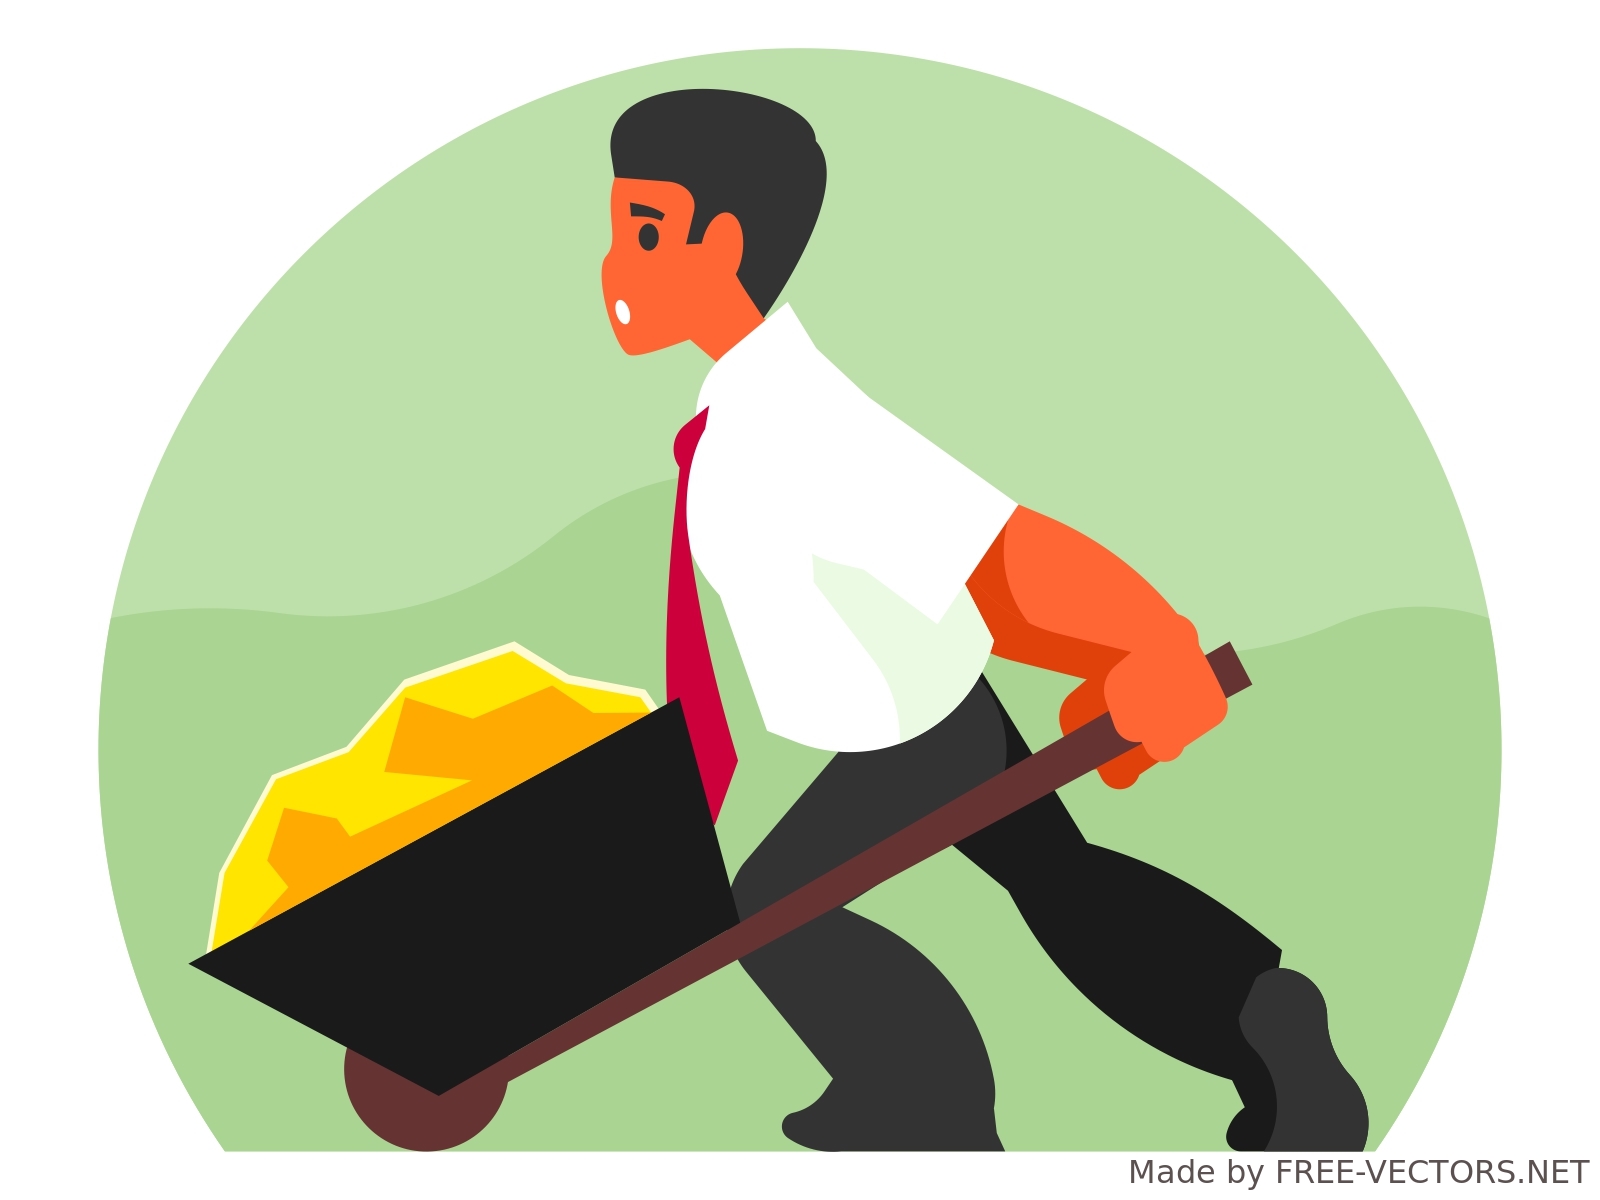 Businessman with cart of gold - Business - FREE-VECTORS.NET